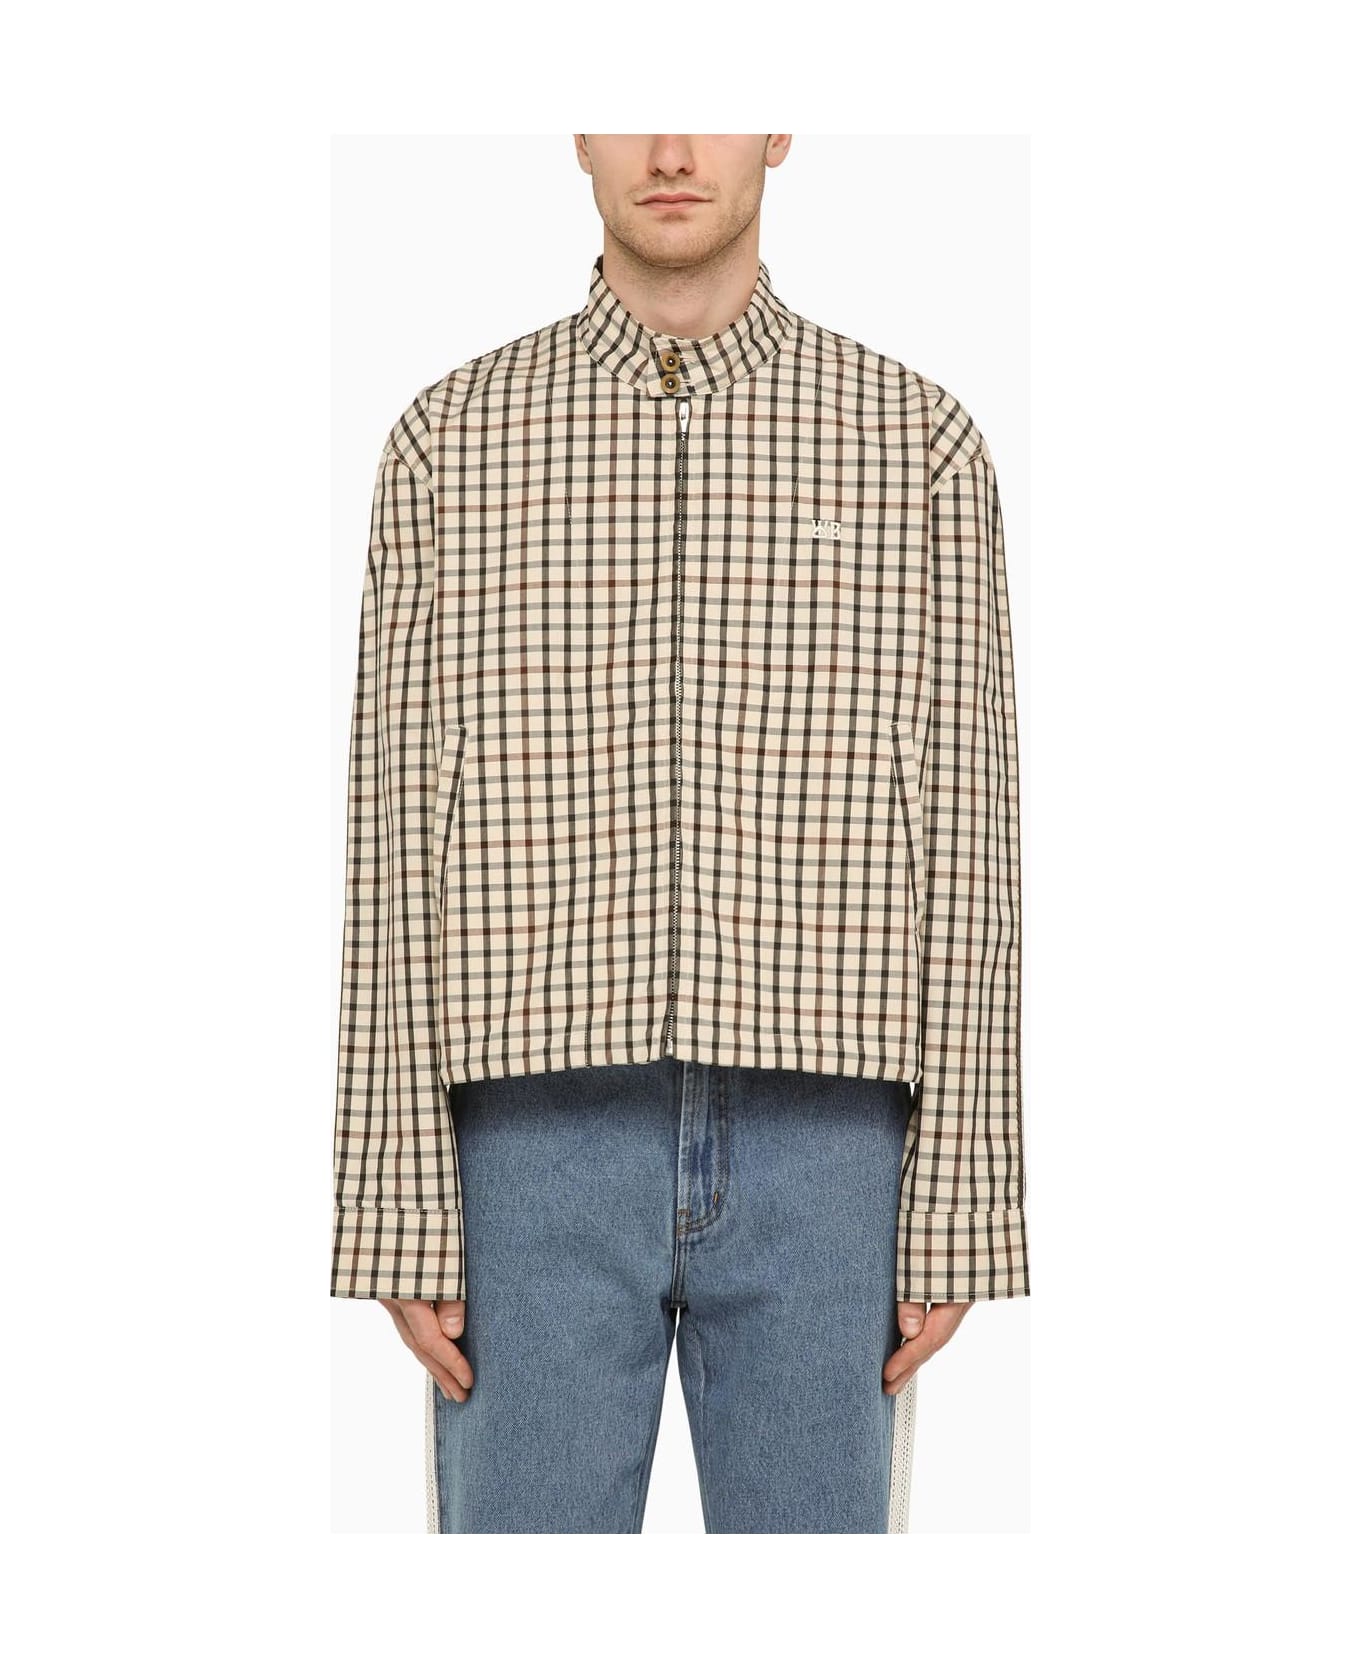 Wales Bonner Light Jacket With Checked Pattern - MultiColour